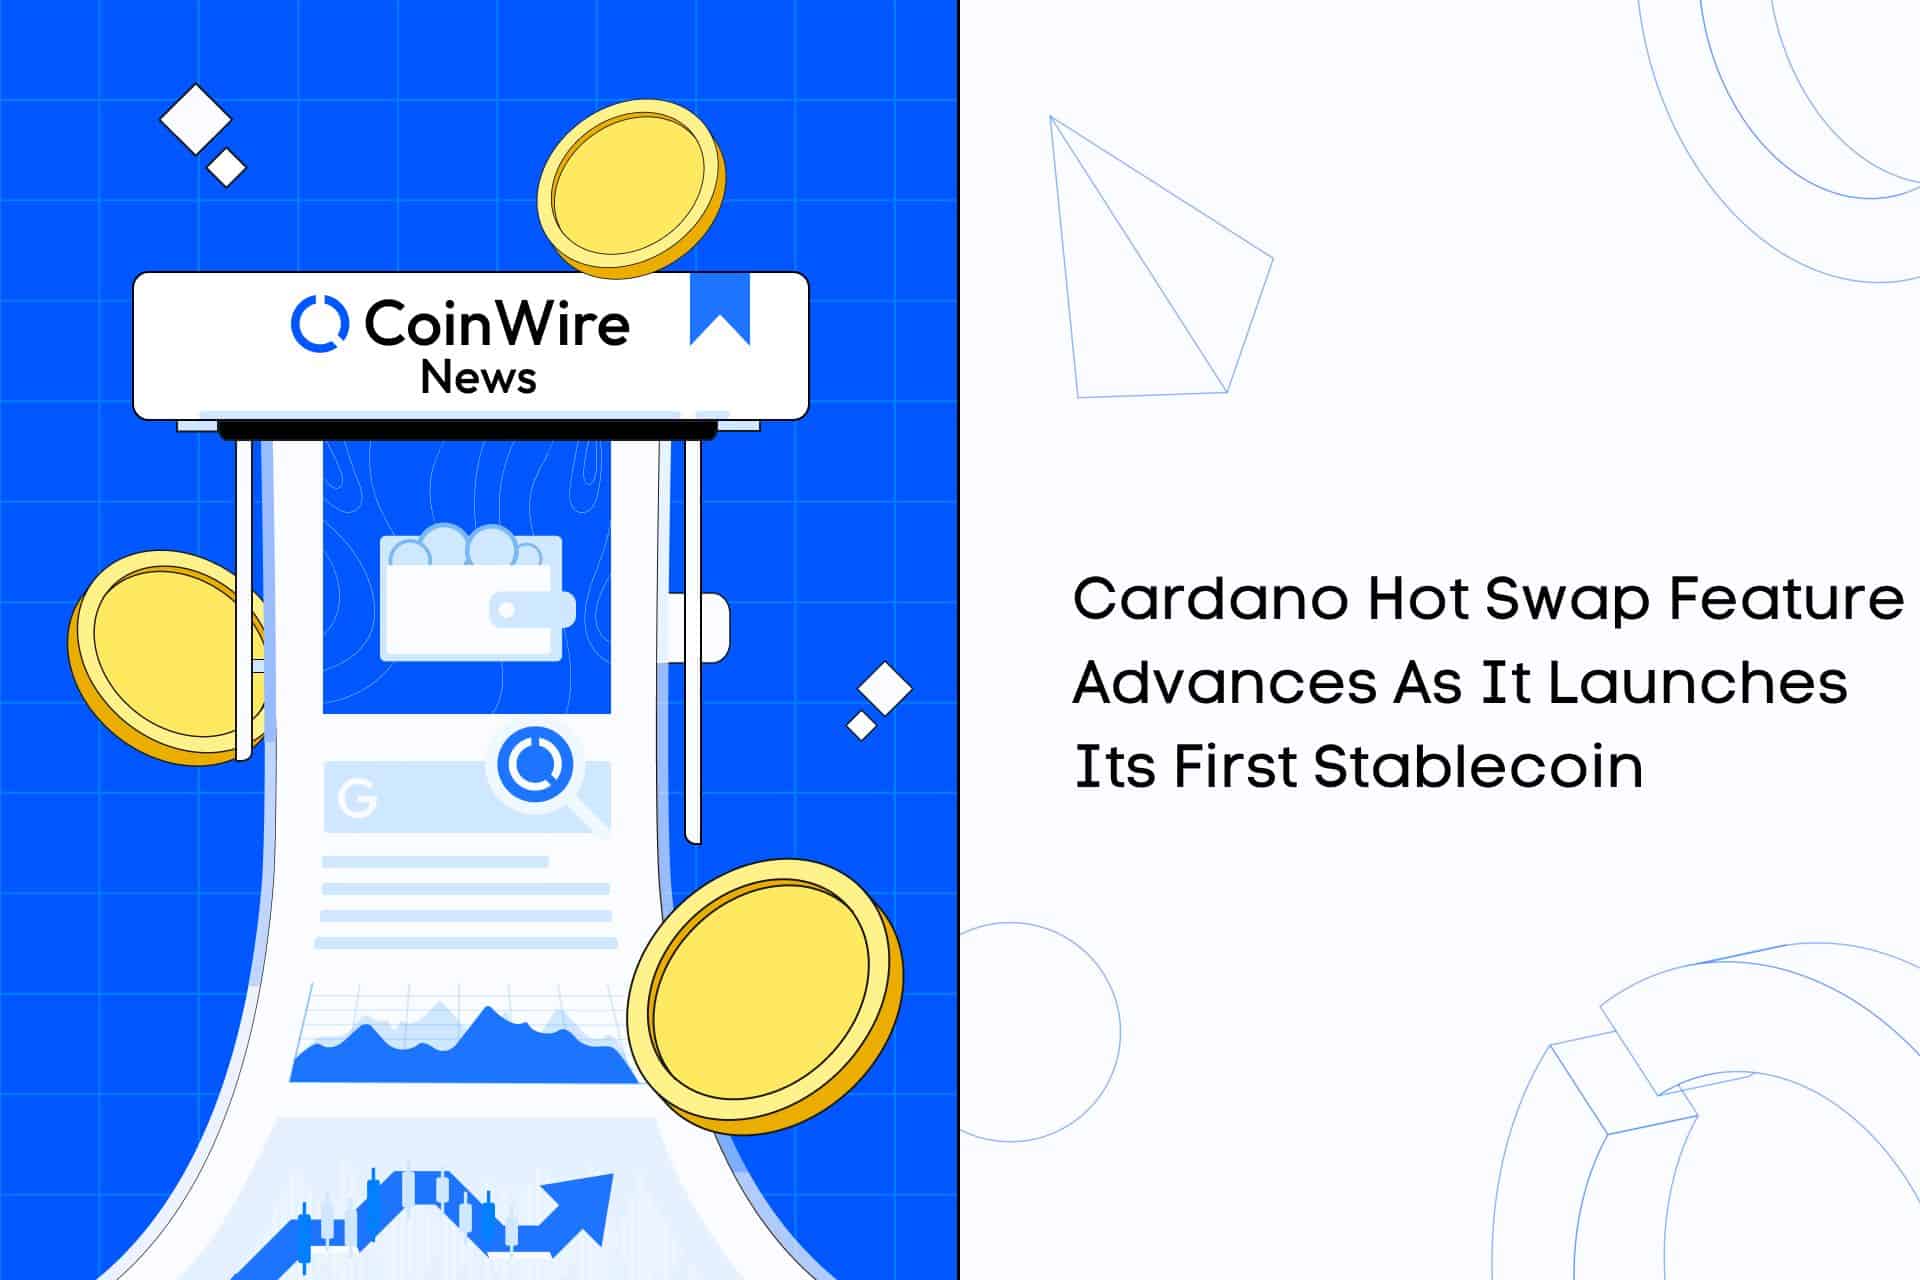 Cardano Hot Swap Feature Advances As It Launches Its First Stablecoin